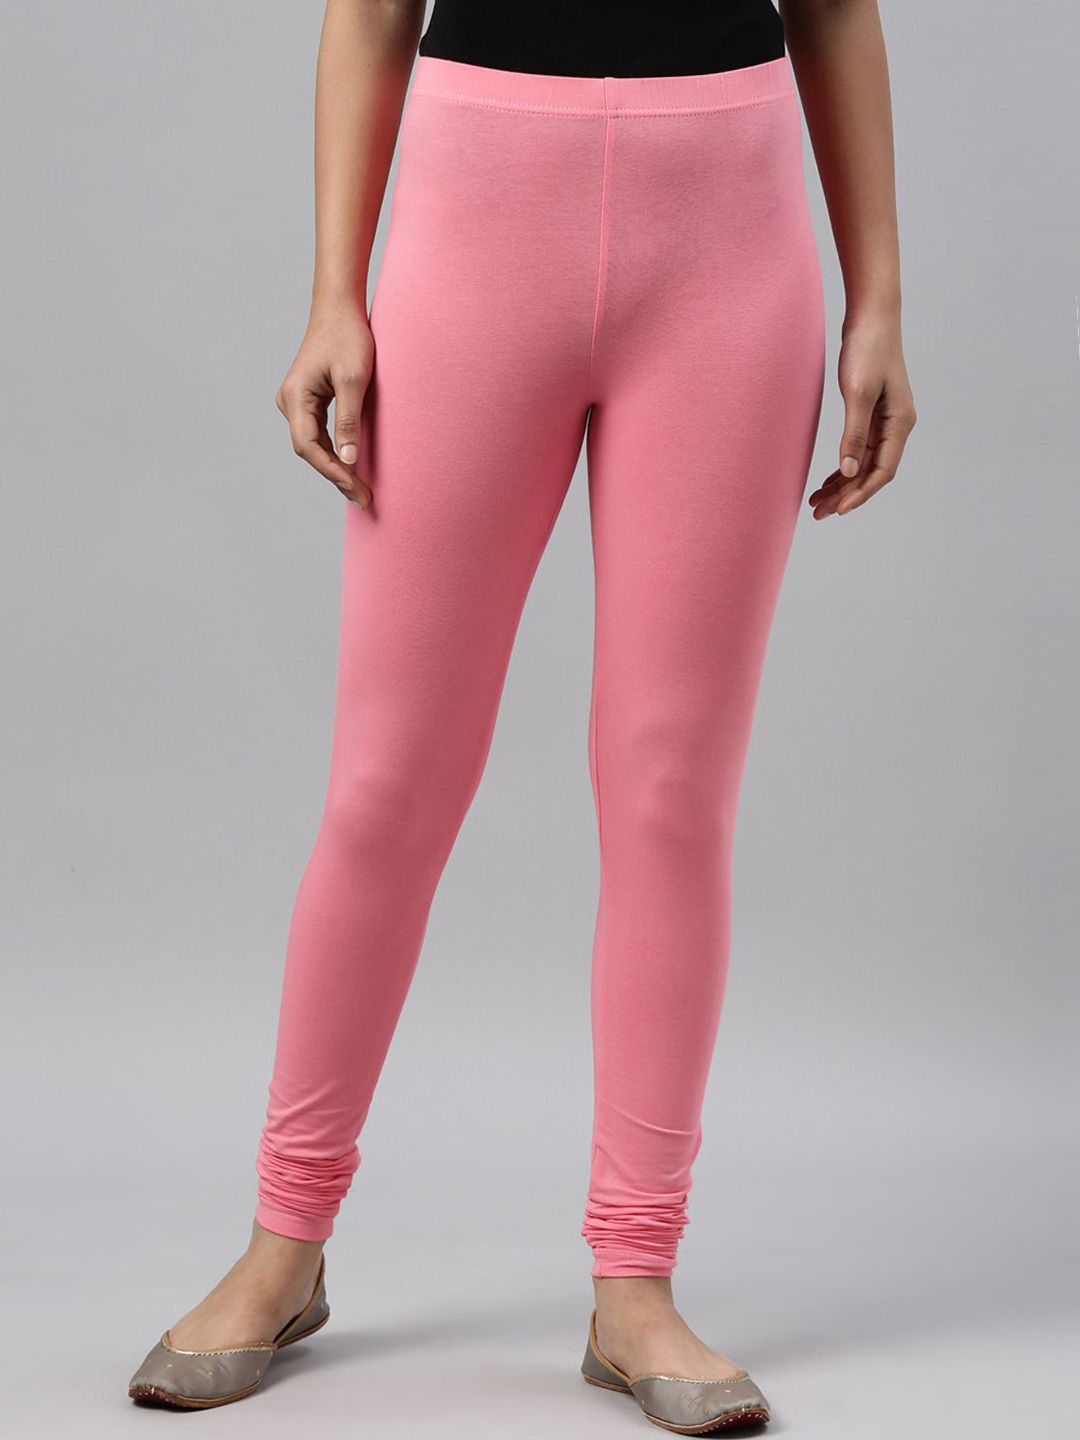 Go Colors Women Pink Solid Cotton Churidar-Length Leggings Price in India